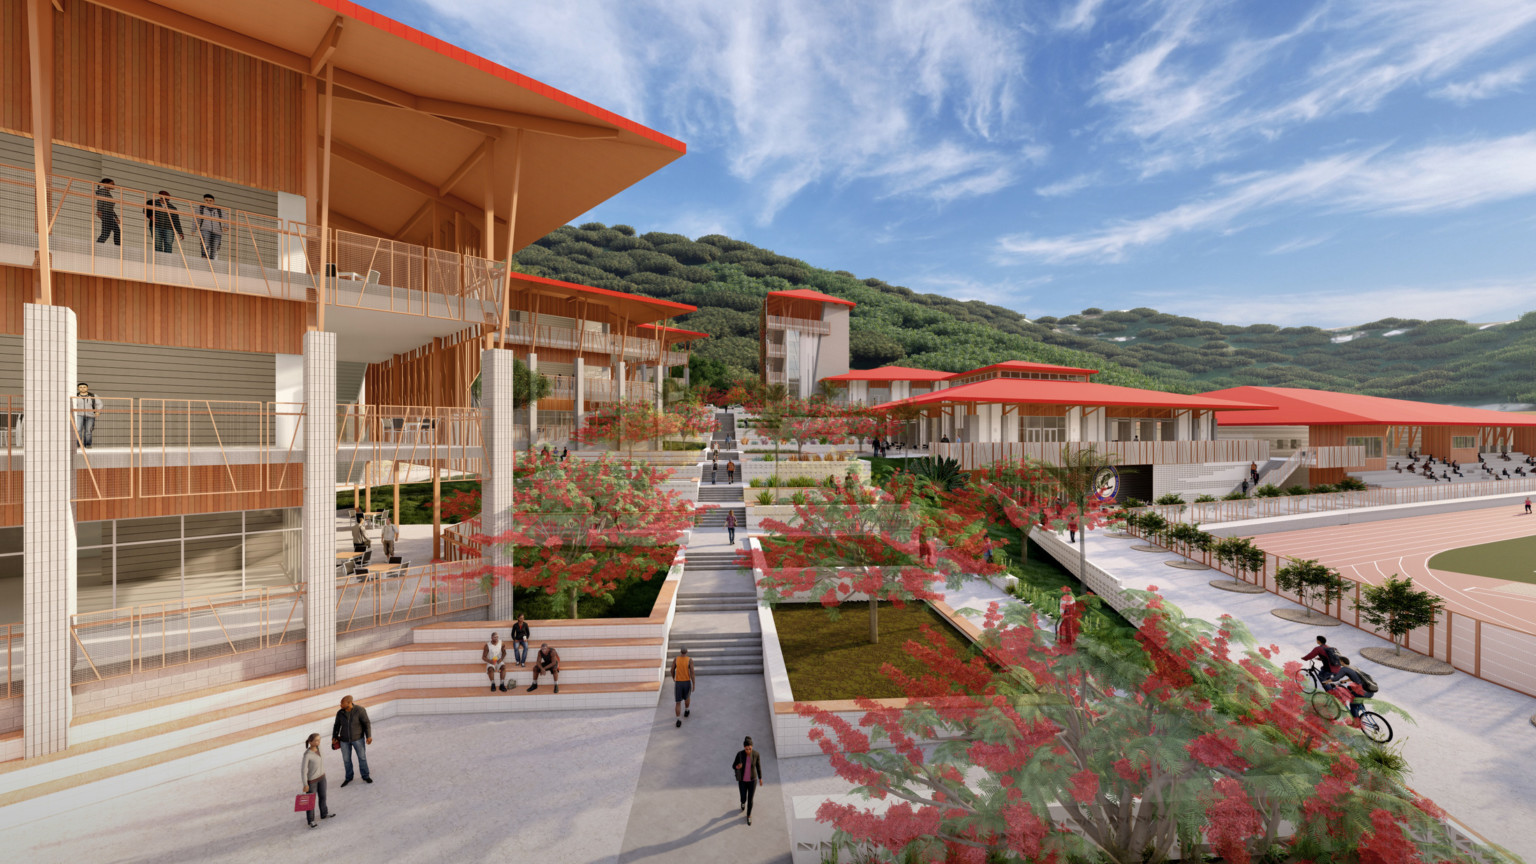 US Virgin Island master plan for Charlotte Amalie High School. Courtyard by stone building with red roof and wood accents